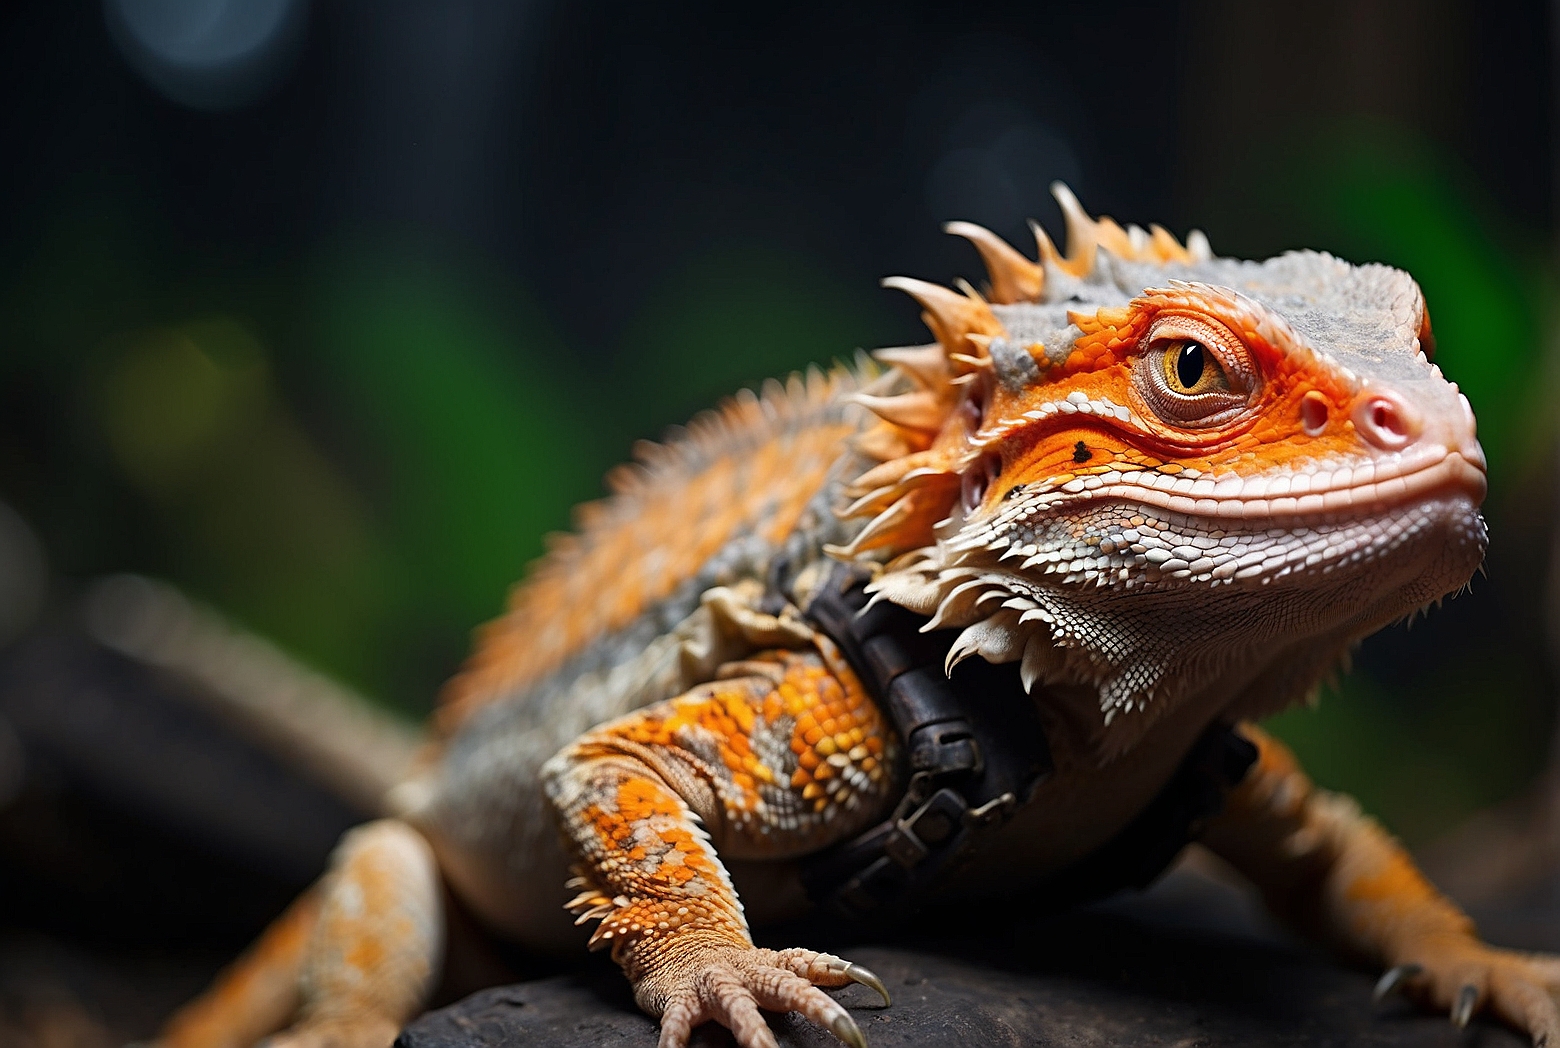 Are Bearded Dragons Affordable?